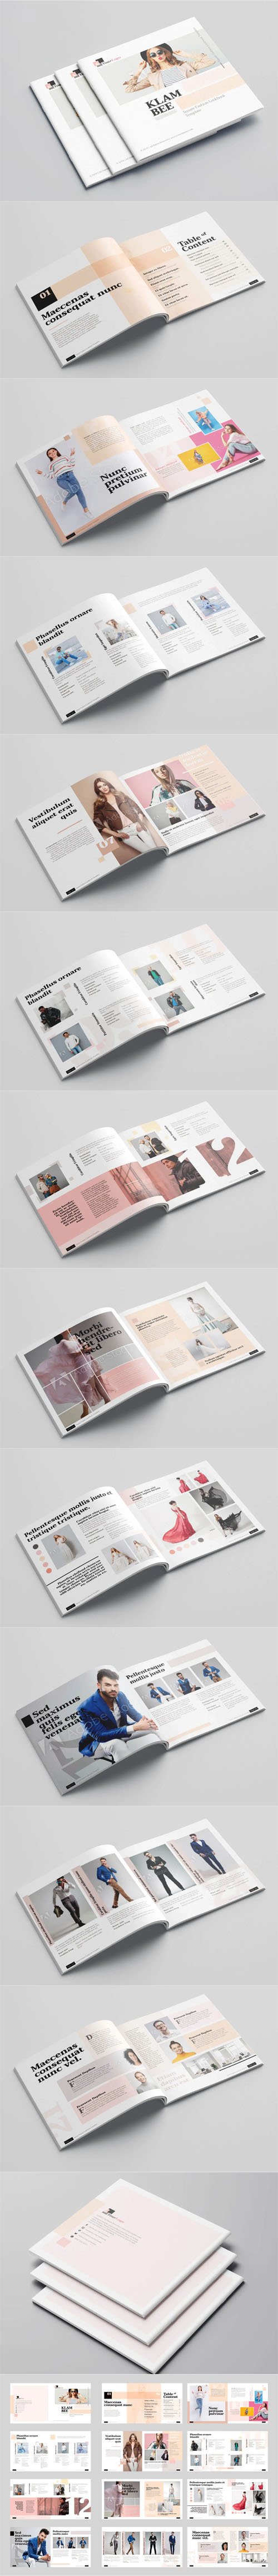 Square Fashion Lookbook INDD Template [24 Pages]